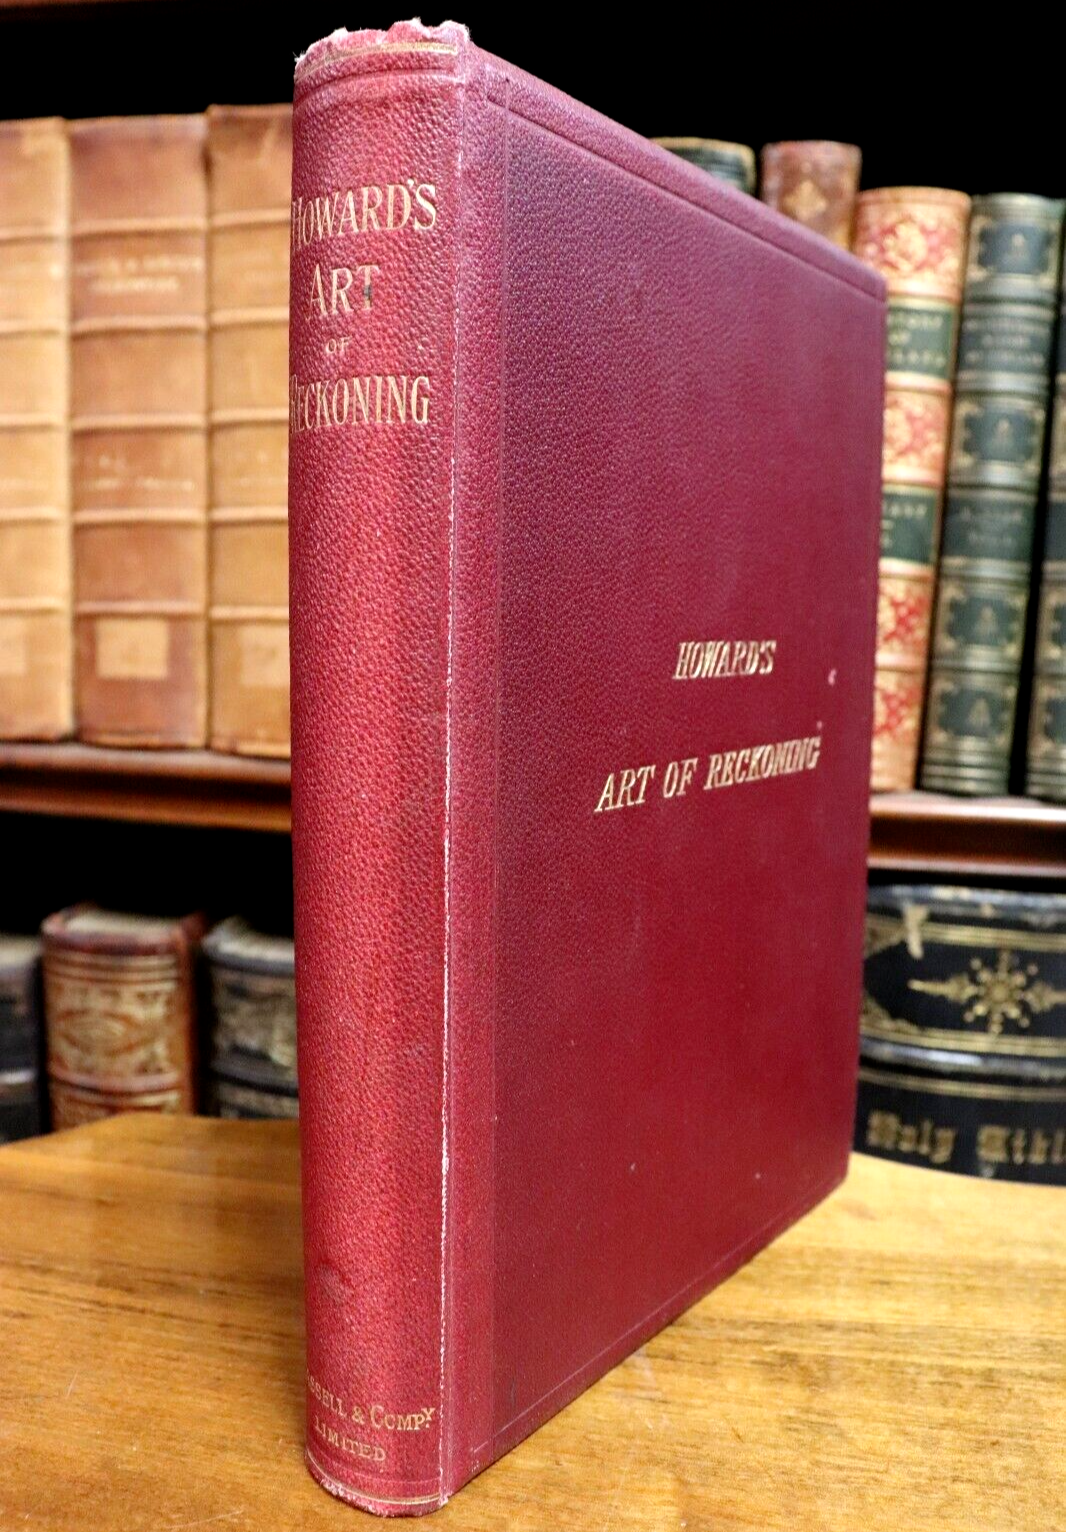 1900 Howard's Art Of Reckoning Antique Financial Reference Book